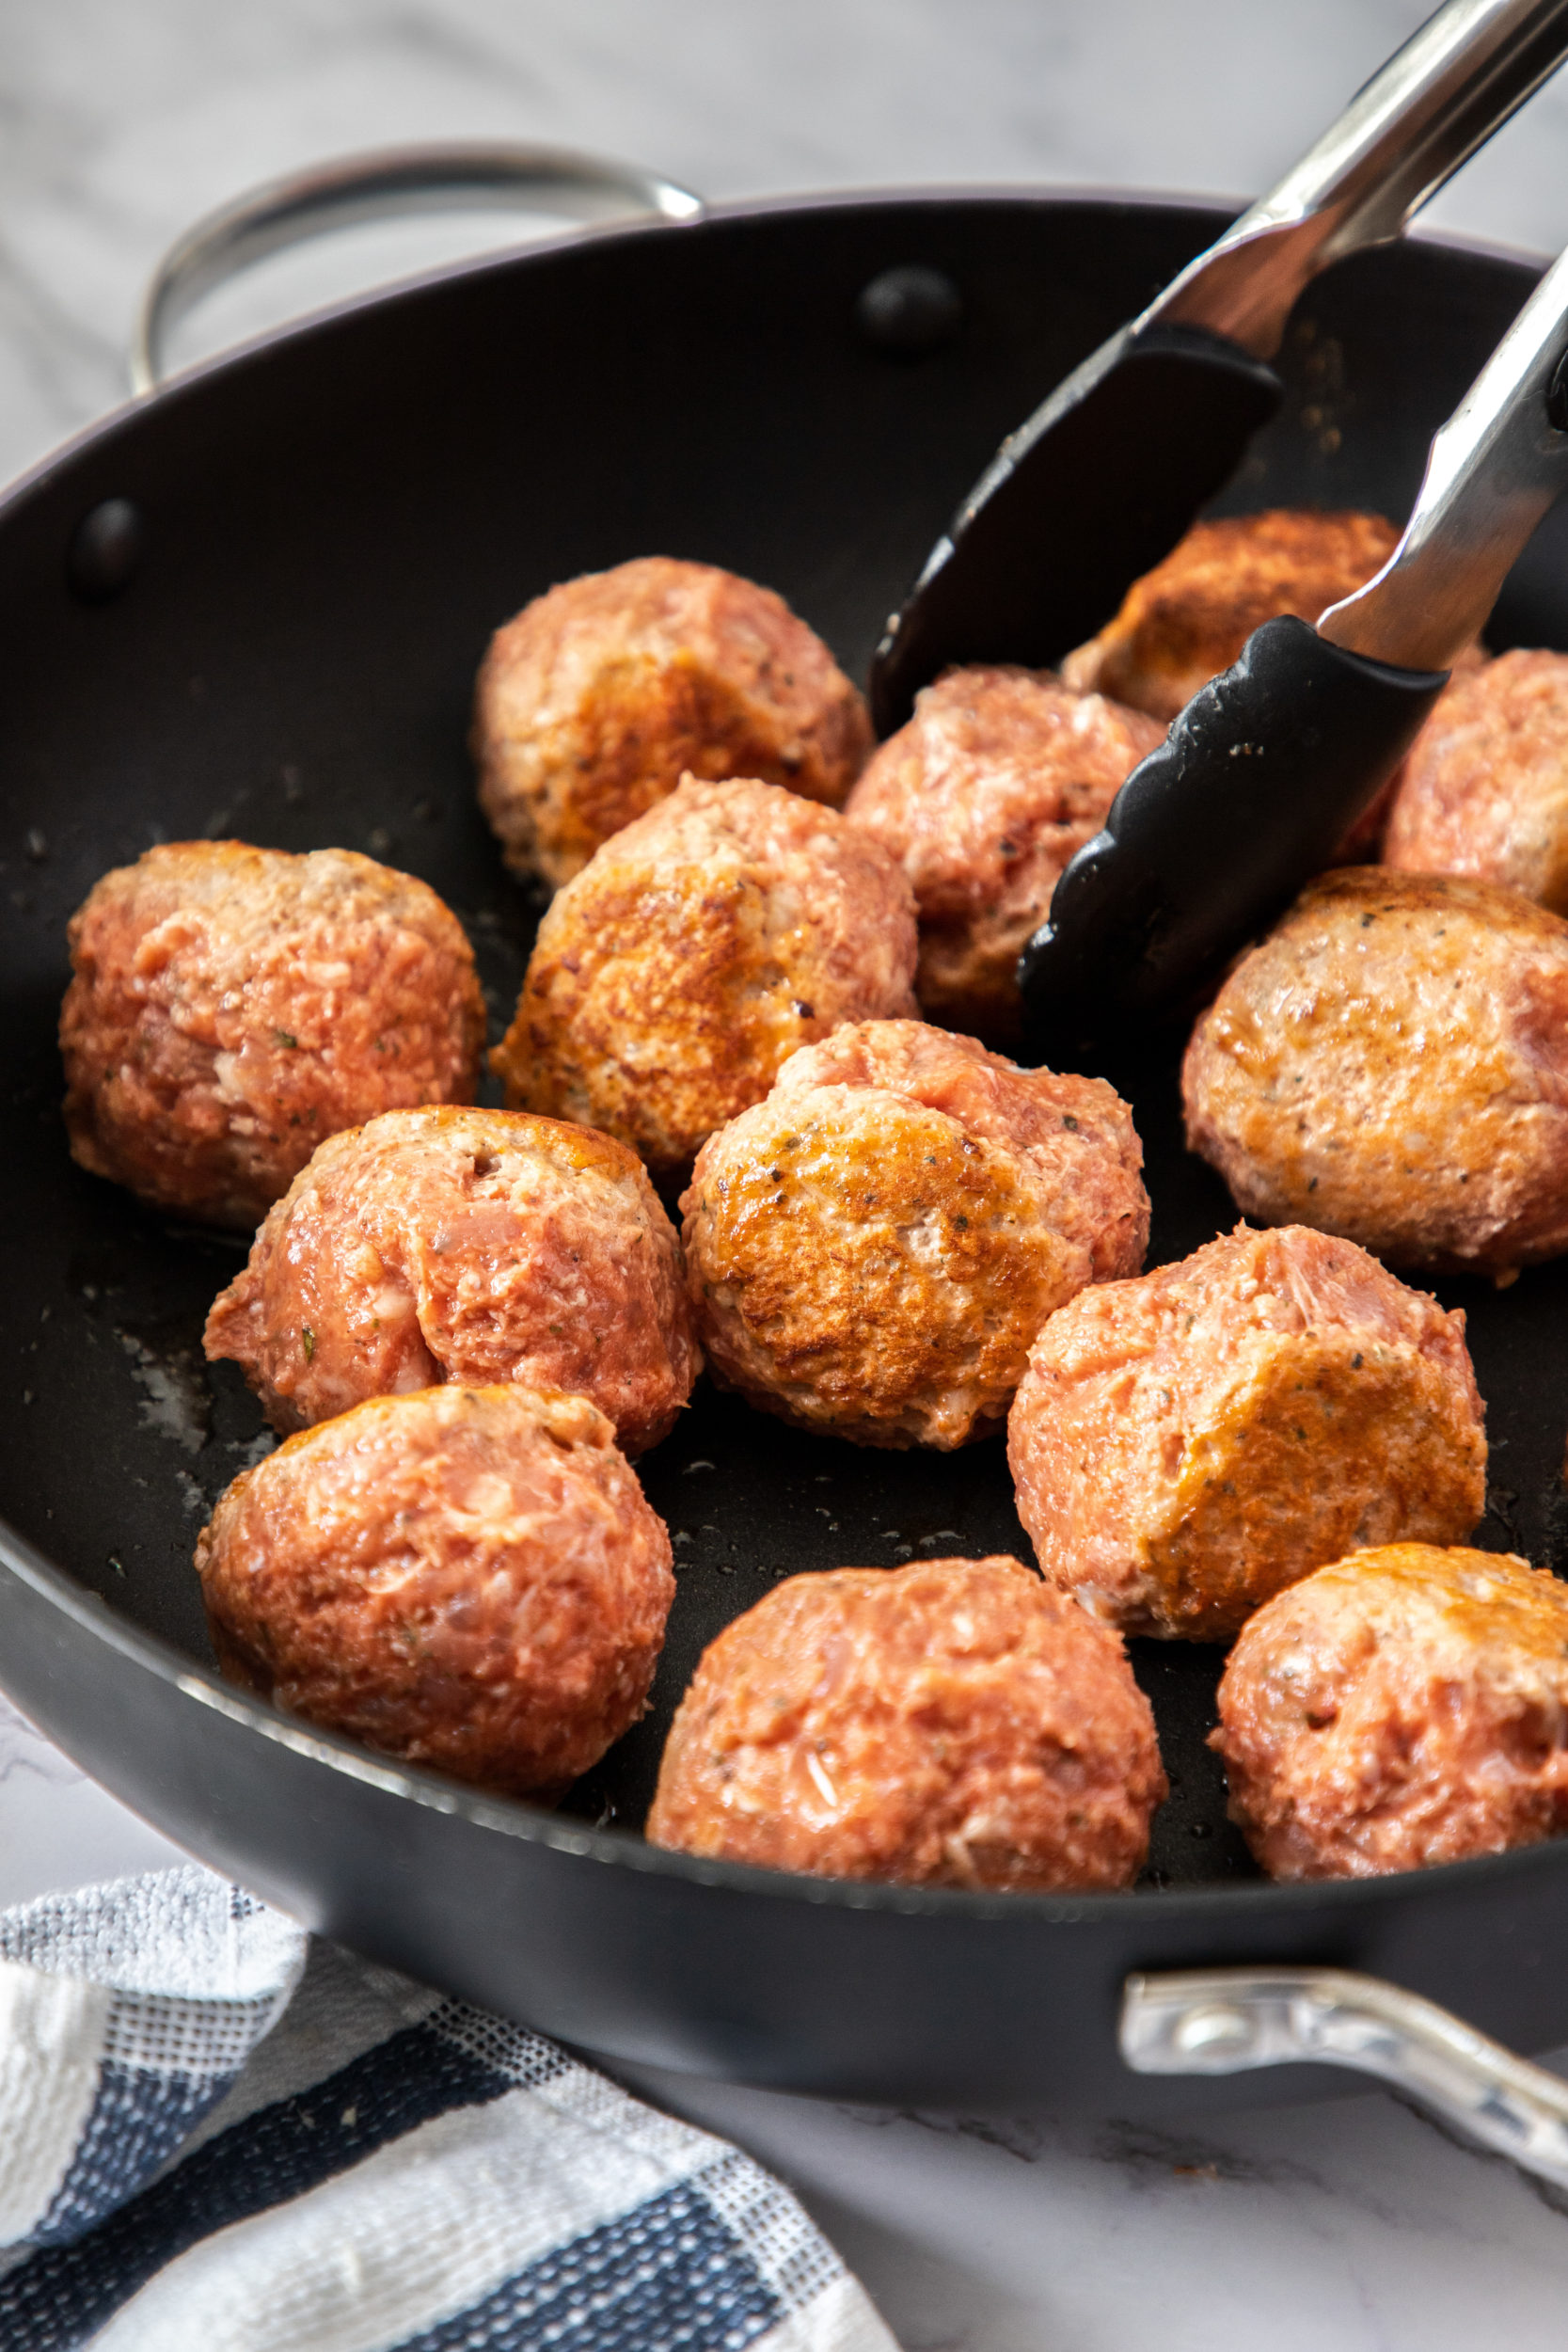 Meatballs cooking in a nonstick skillet